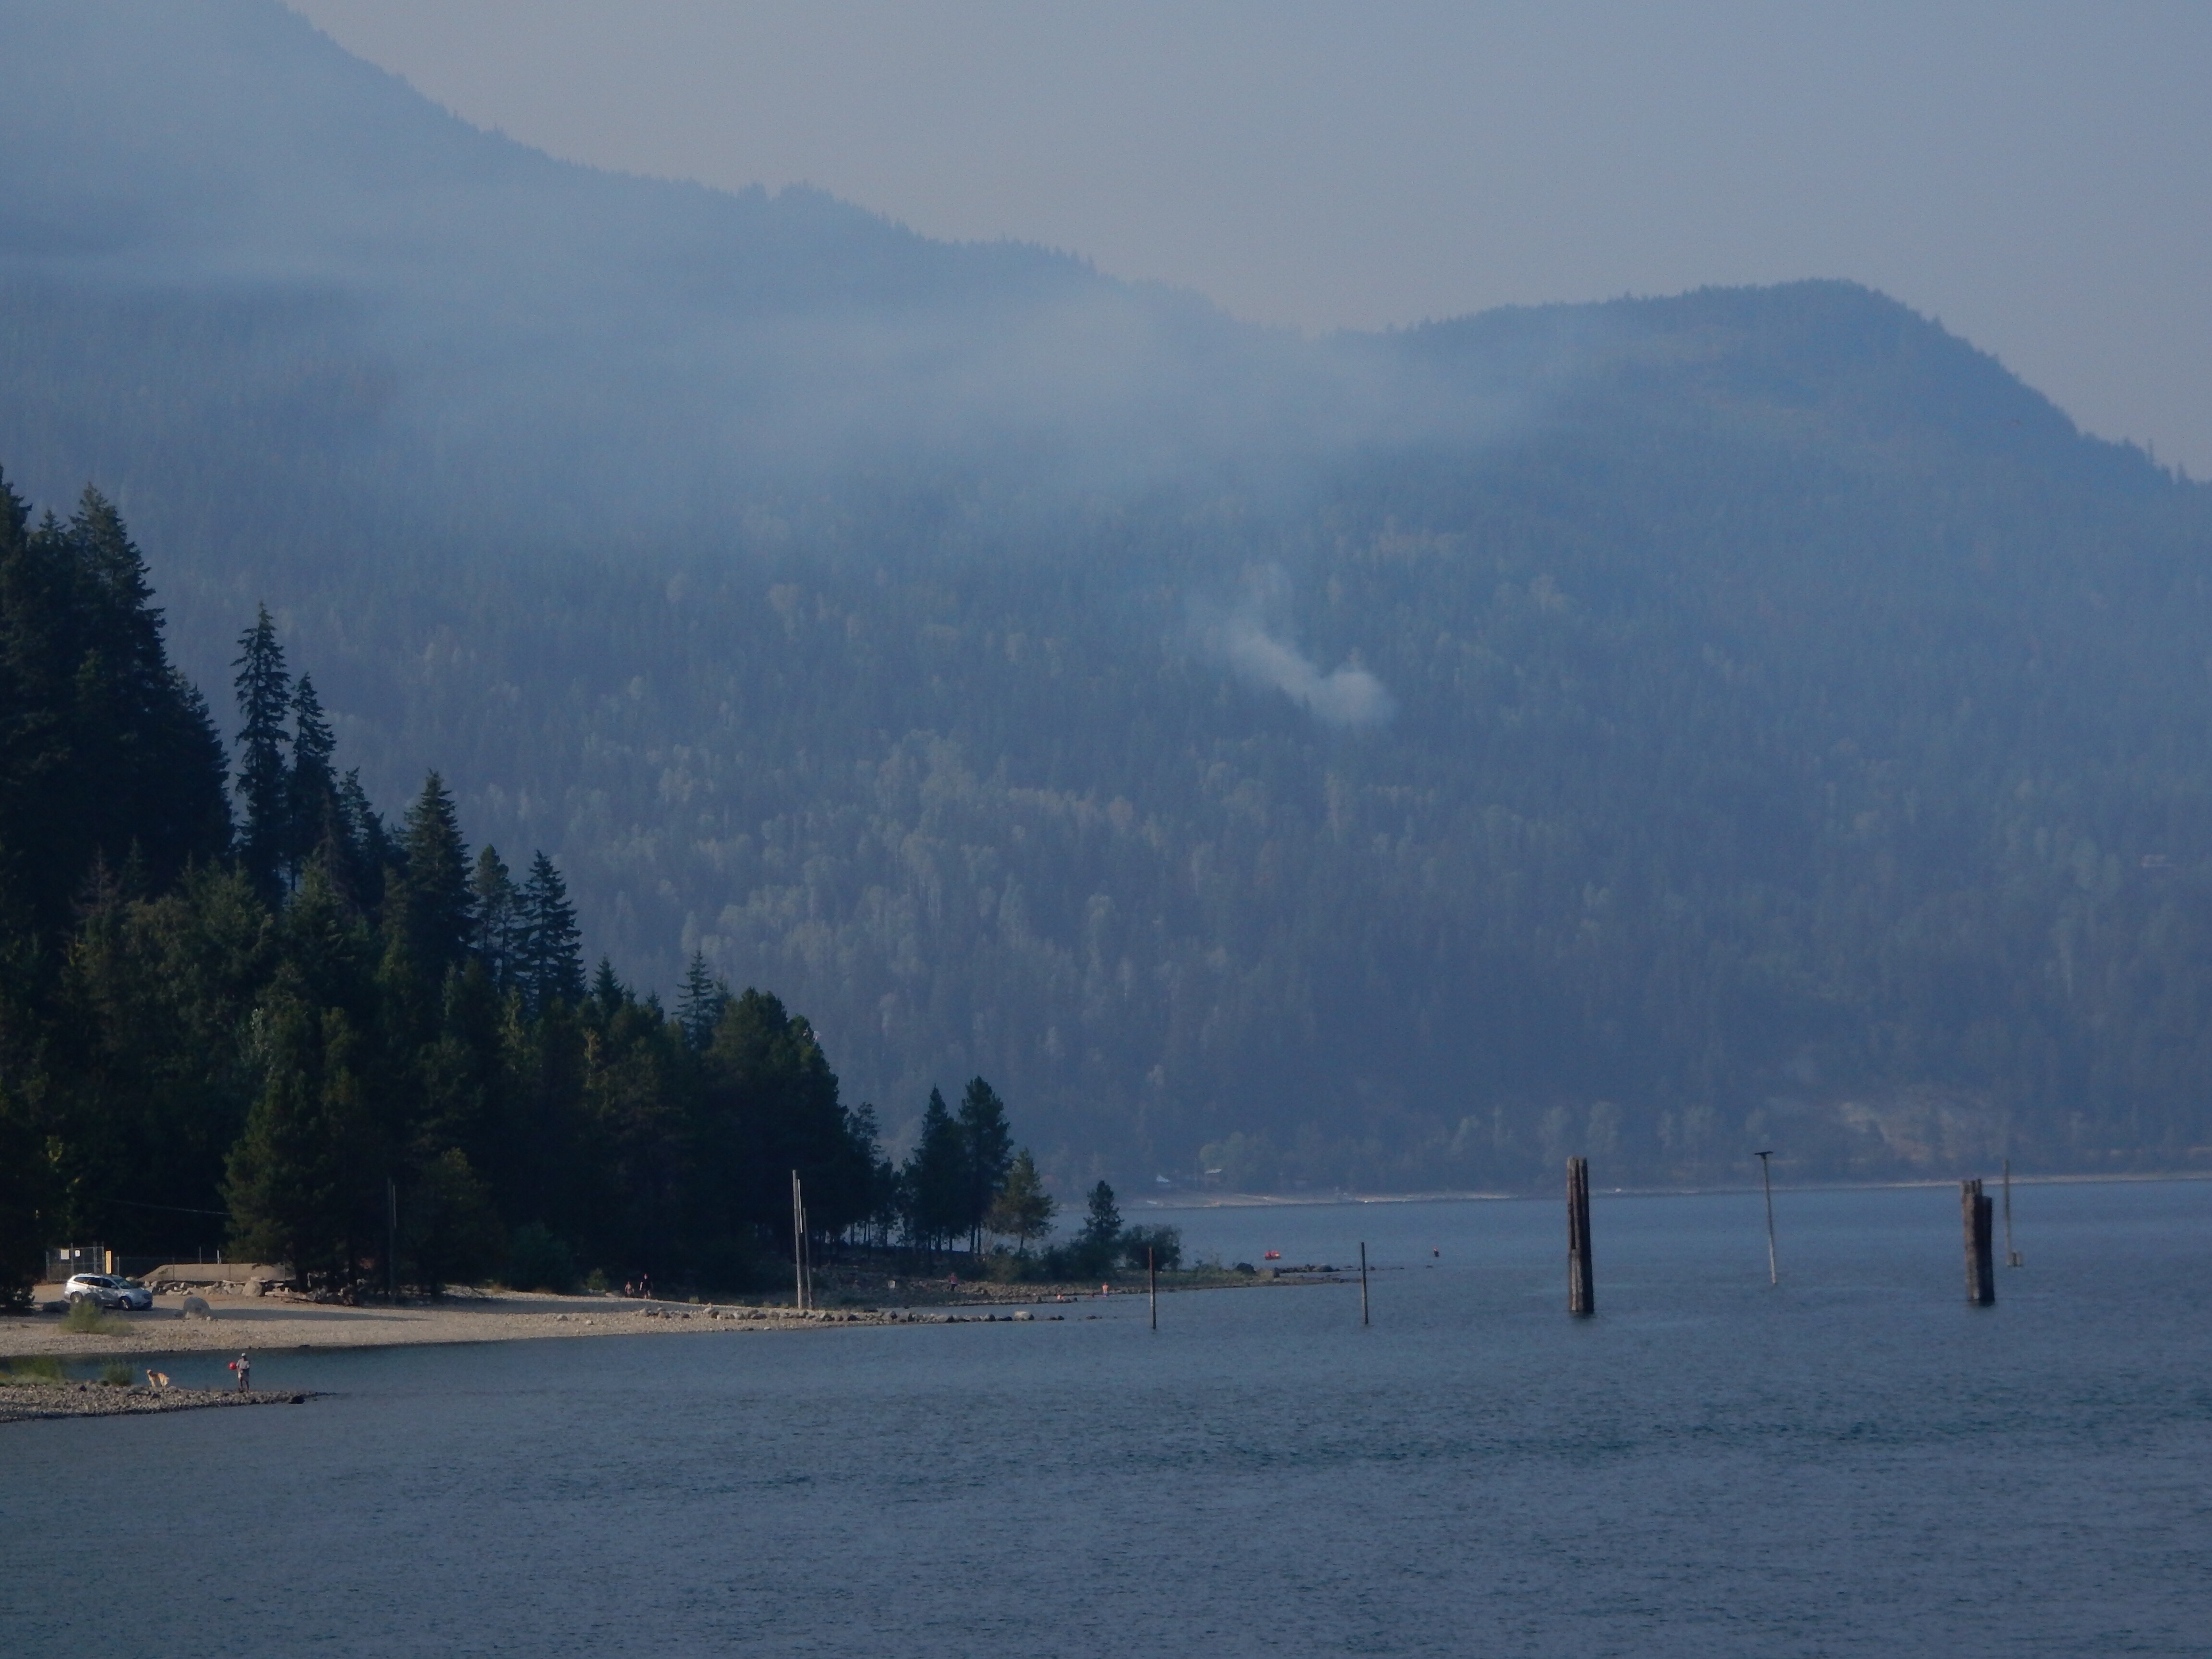 This fire started north of Balfour while I was waiting for the ferry.